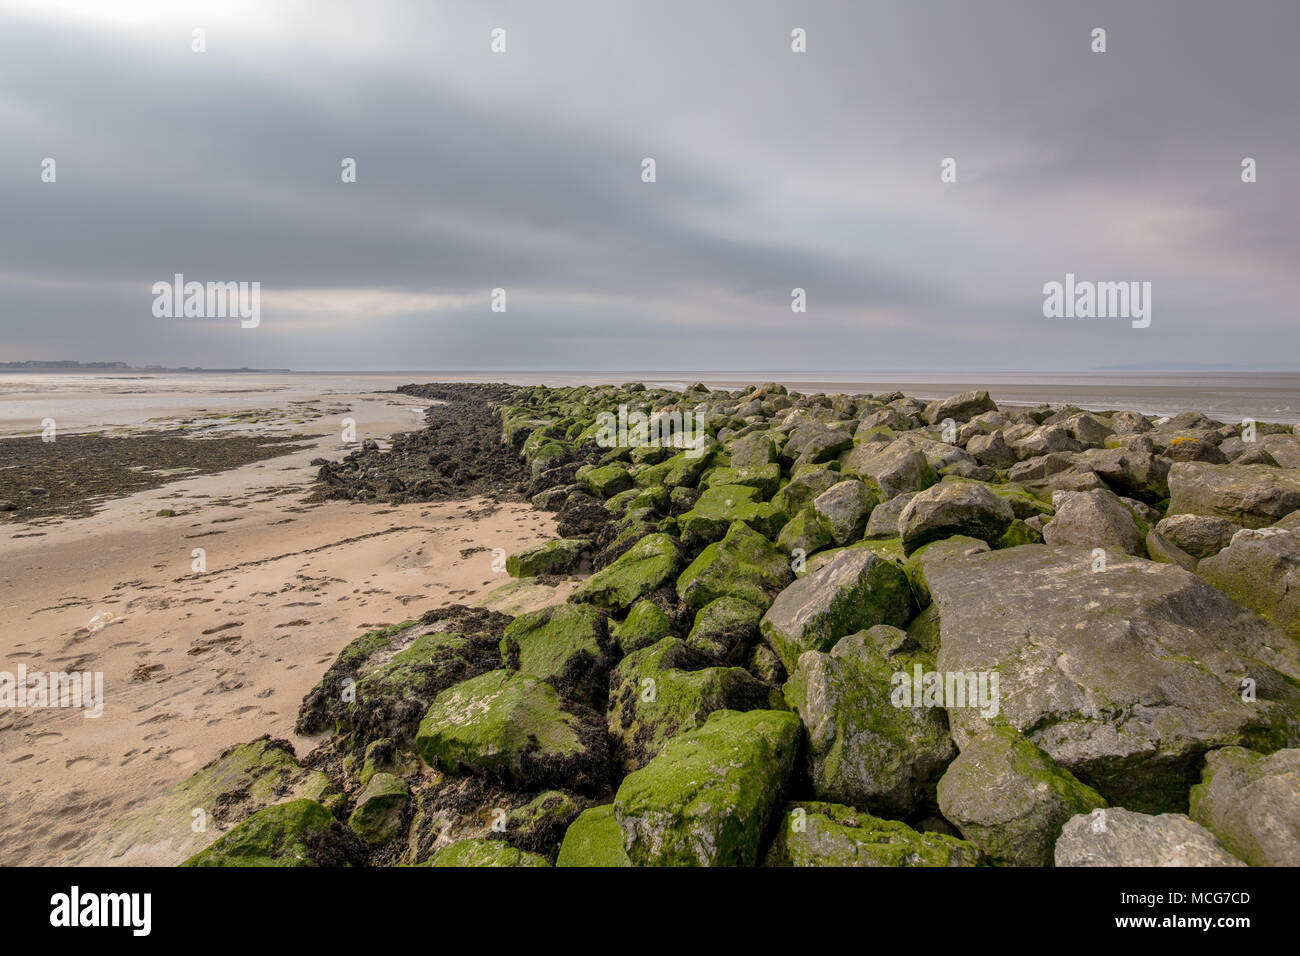 Rocky moss covered breakwaters on the beach at Morecambe, England, UK.  Taken on 11 April 2018. Stock Photo